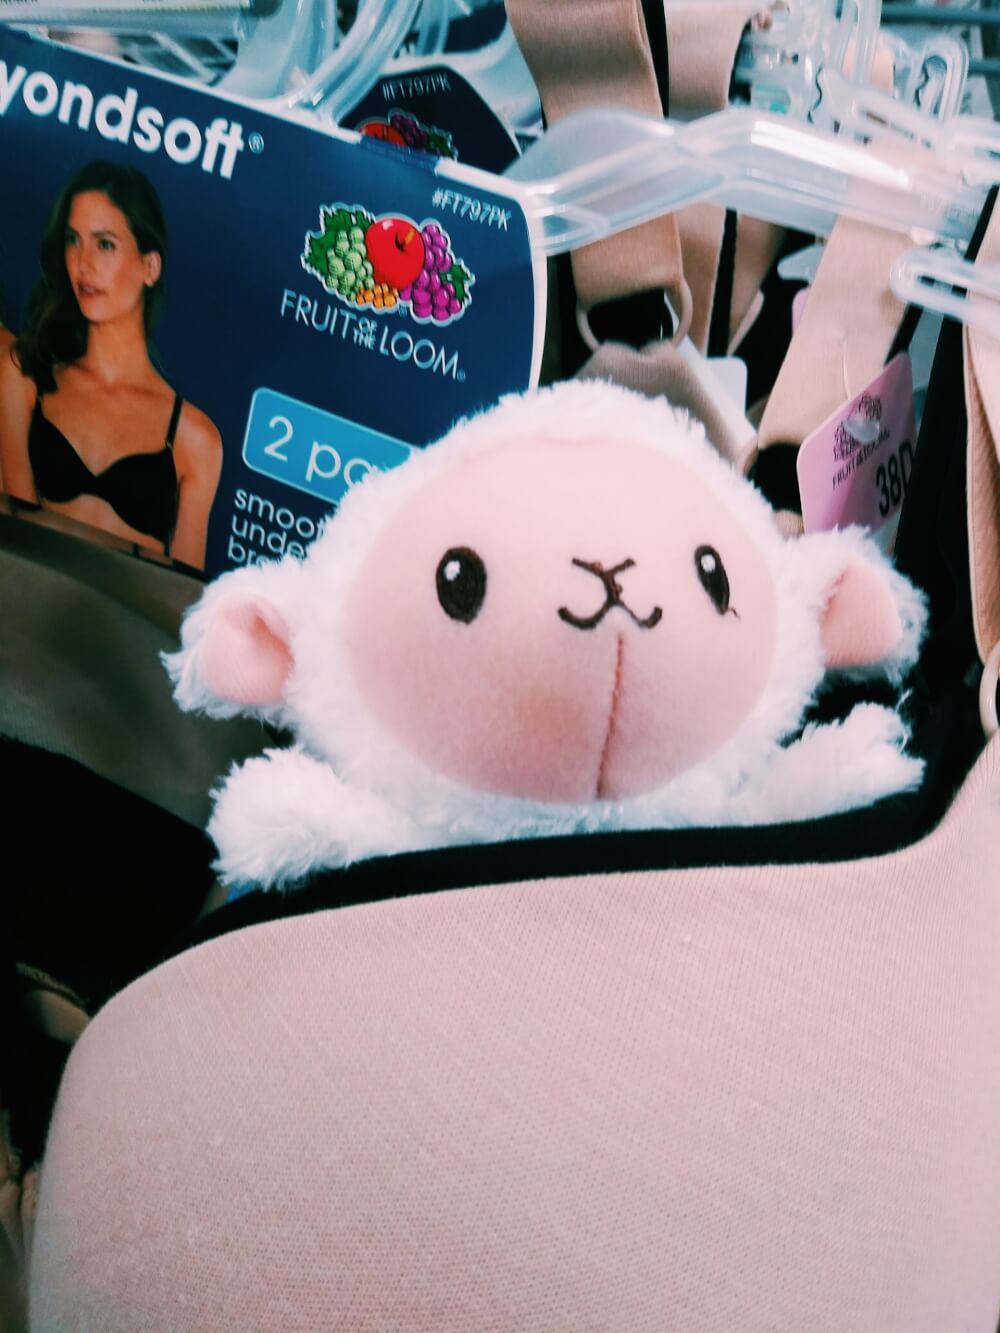 Stuffed sheep toy inside cup of bra at store